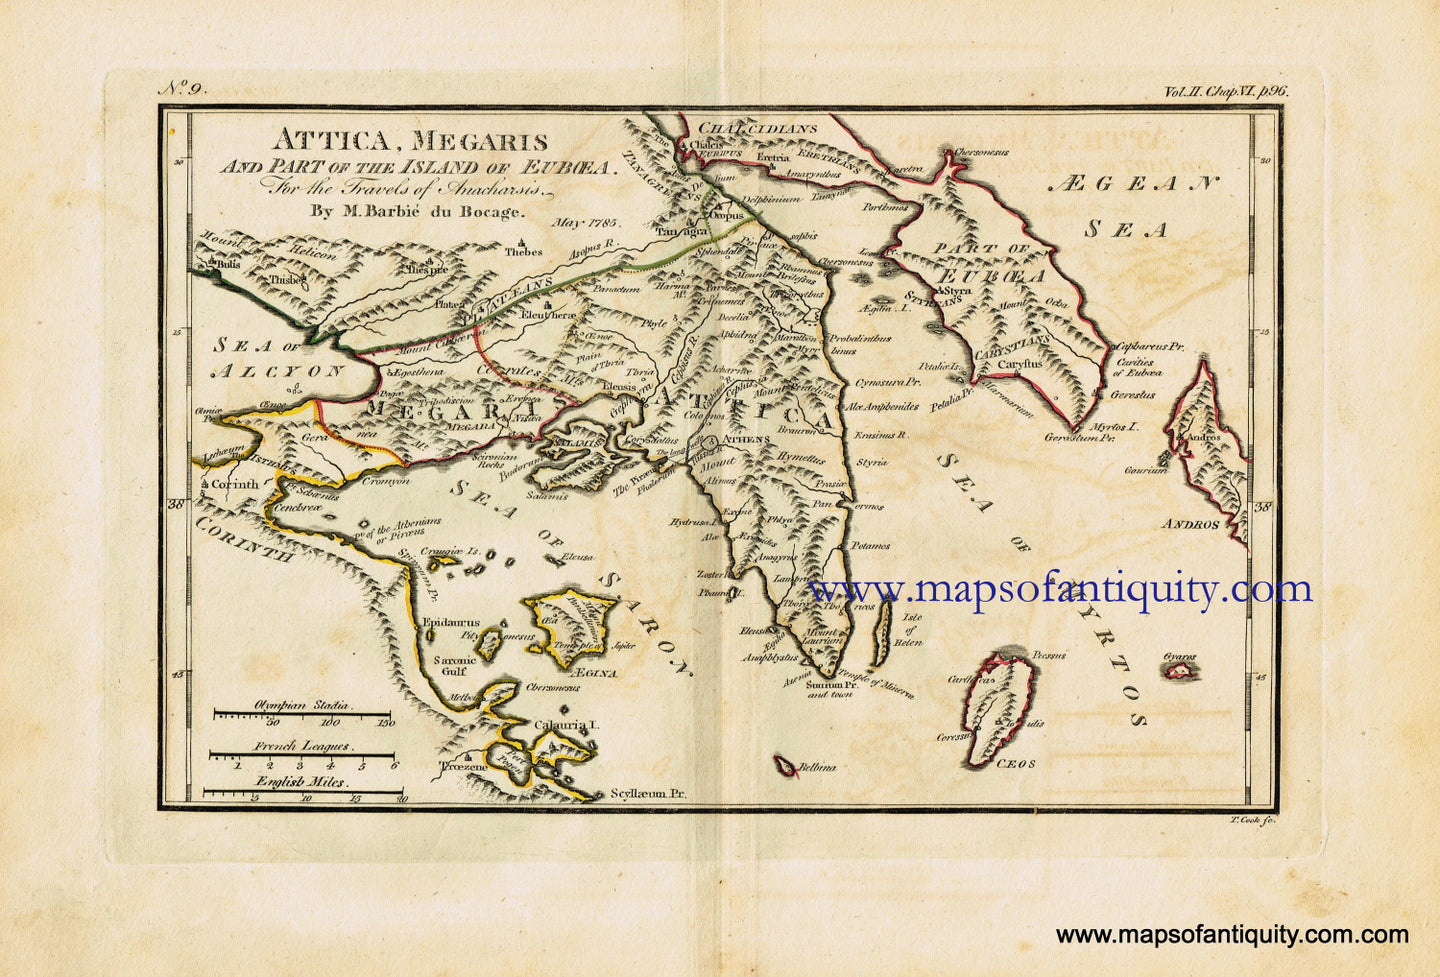 Antique-Hand-Colored-Map-Attica-Megaris-and-Part-of-the-Island-of-Euboea-Greece-Europe-Greece-1791-Barbie-du-Bocage-Maps-Of-Antiquity